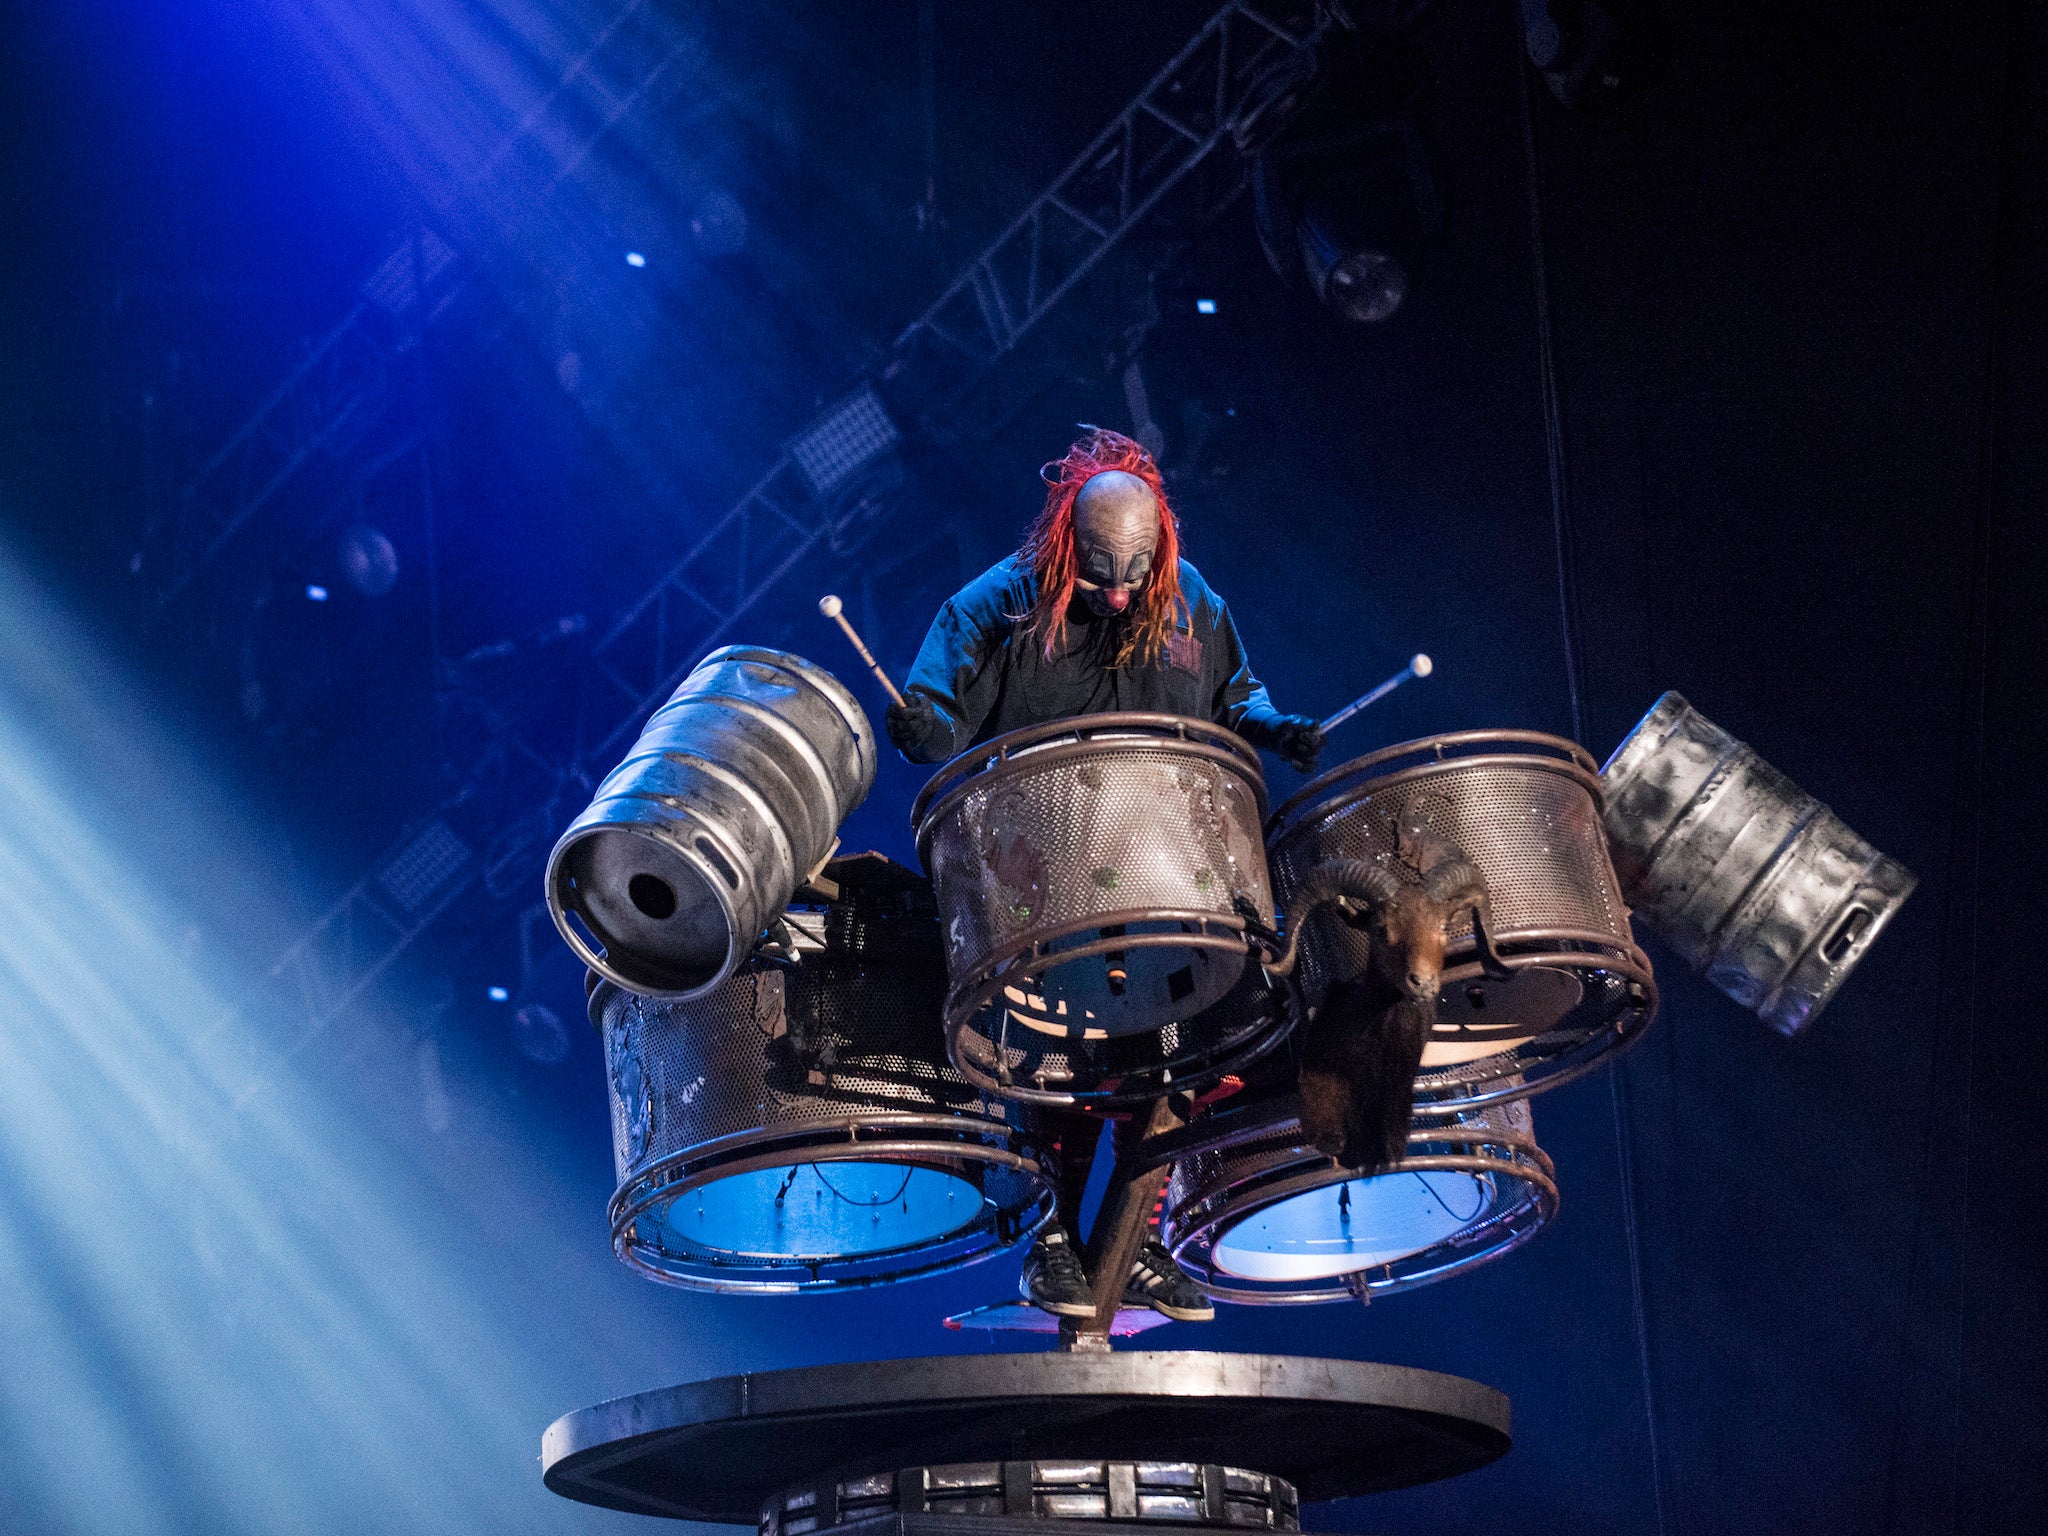 Shawn Crahan performs at the 2015 Rock in Rio festival